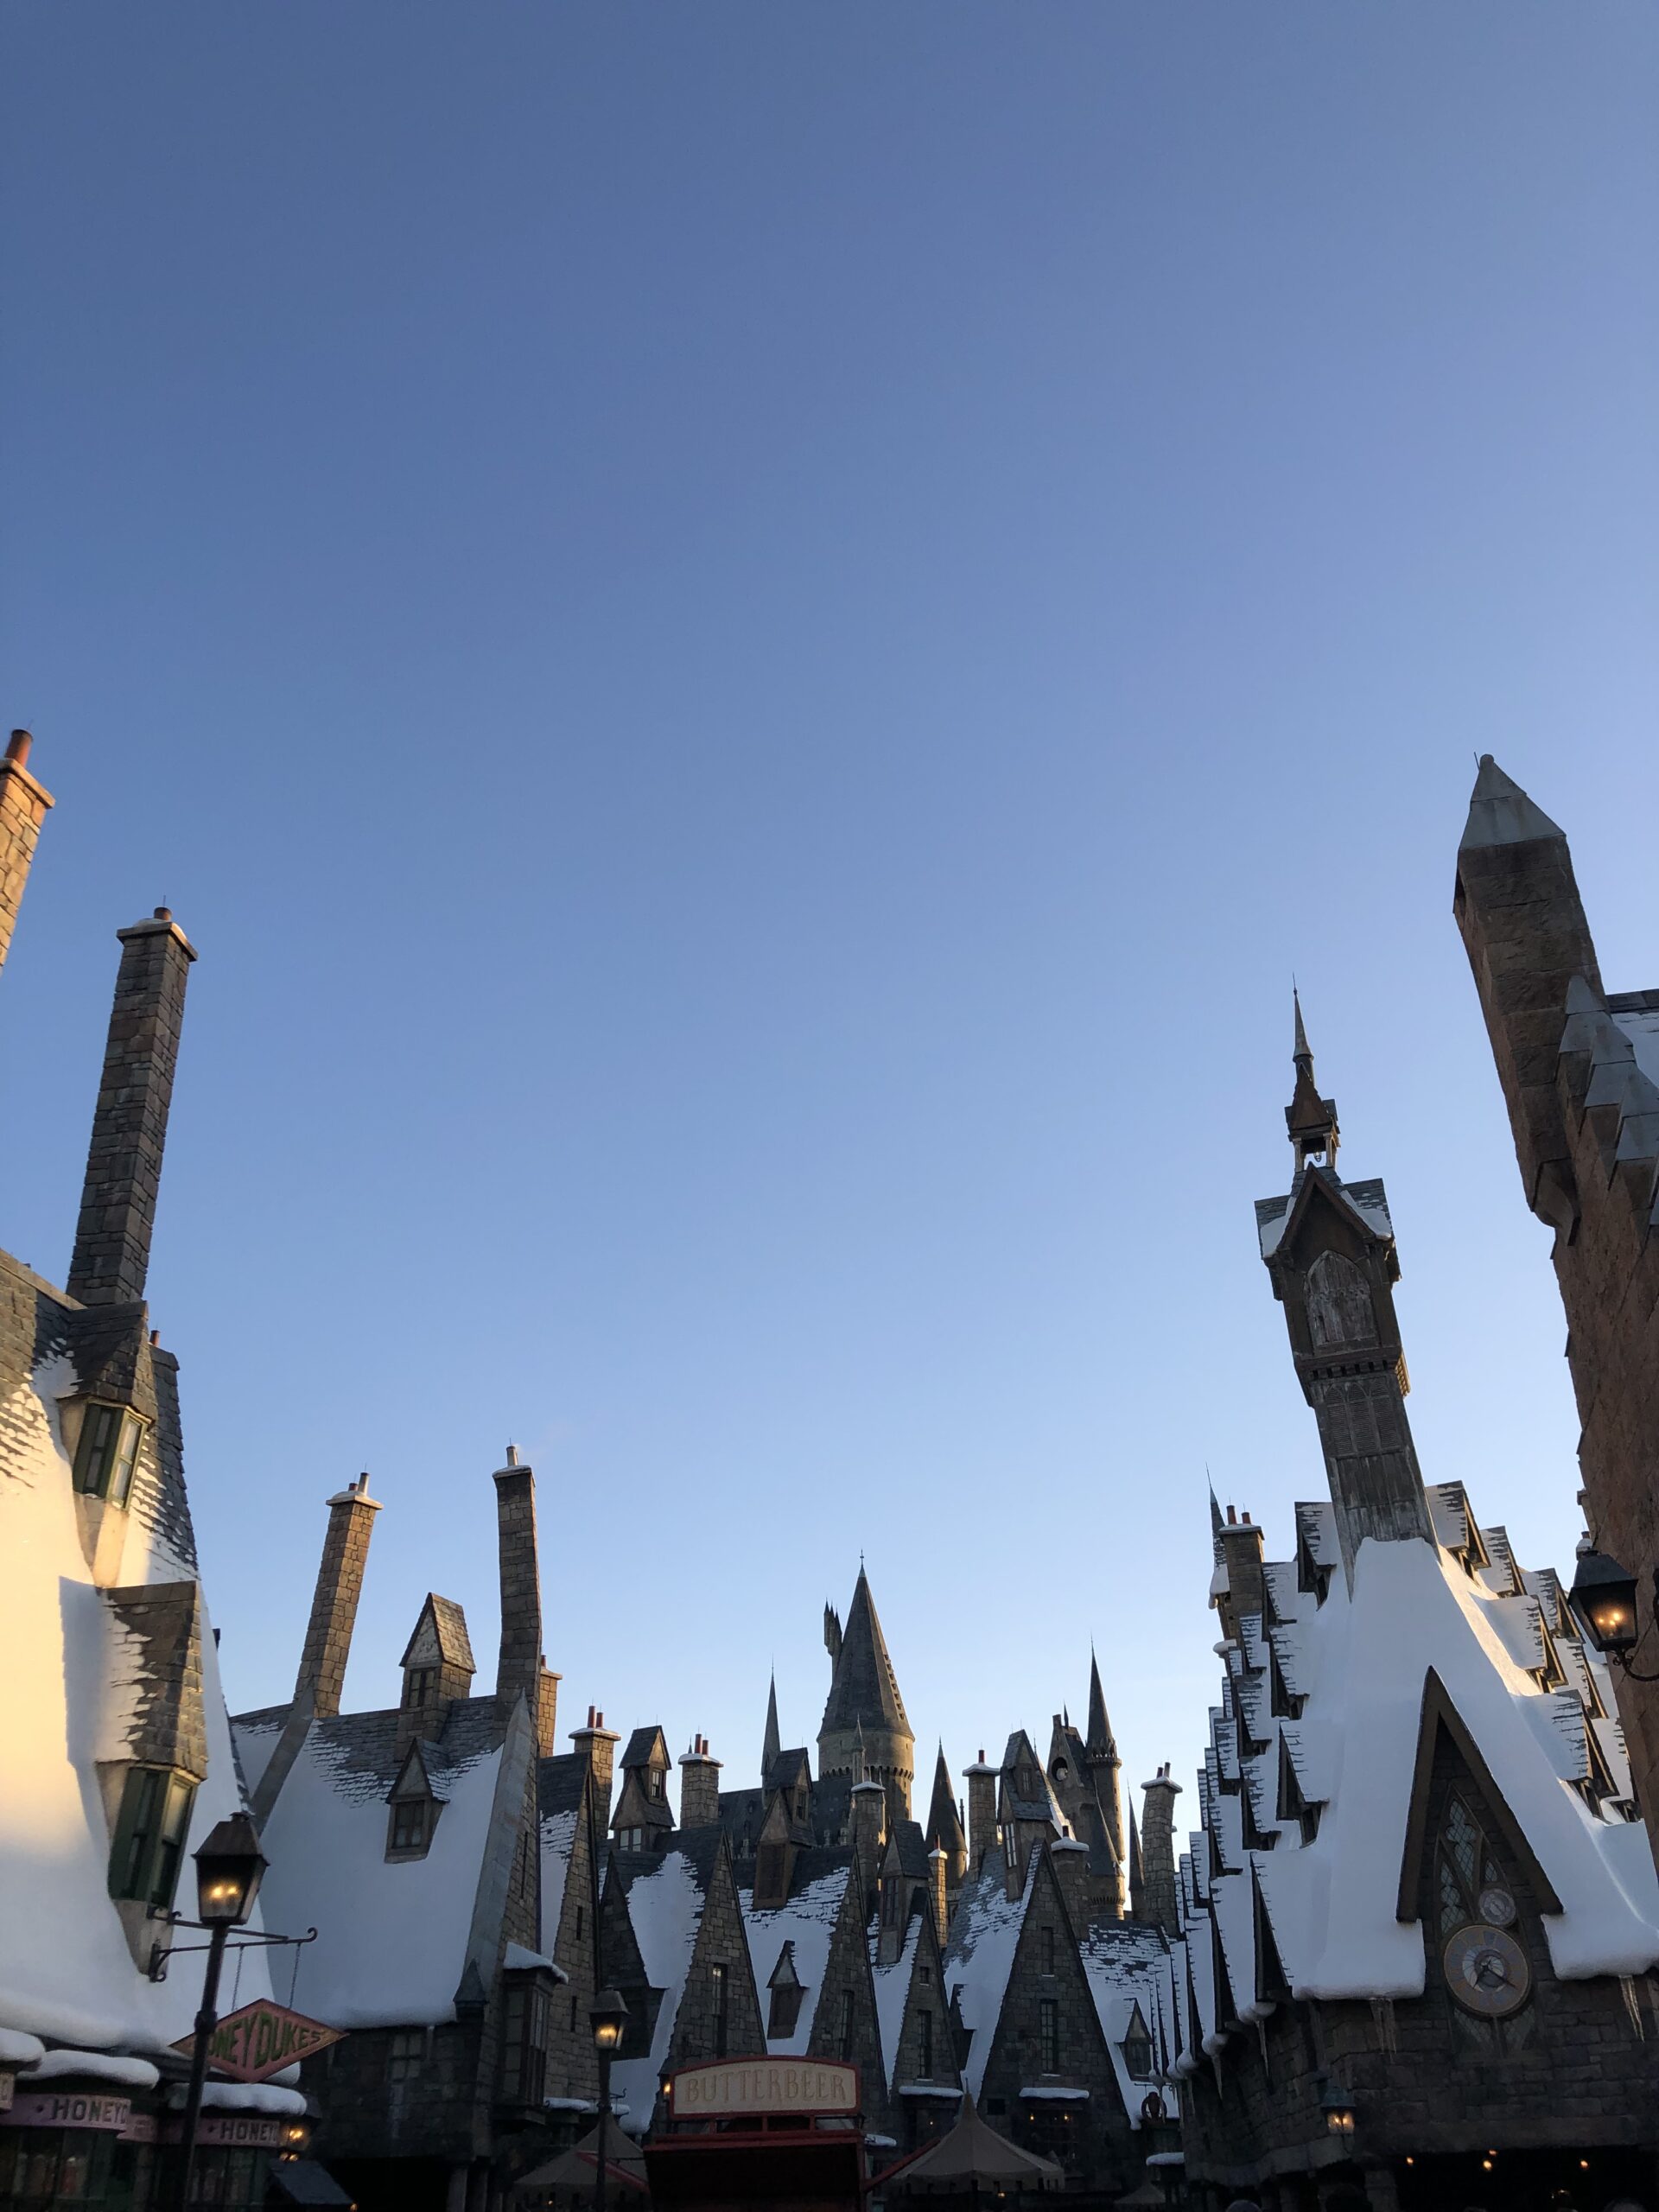 Tips For Traveling to Universal Orlando